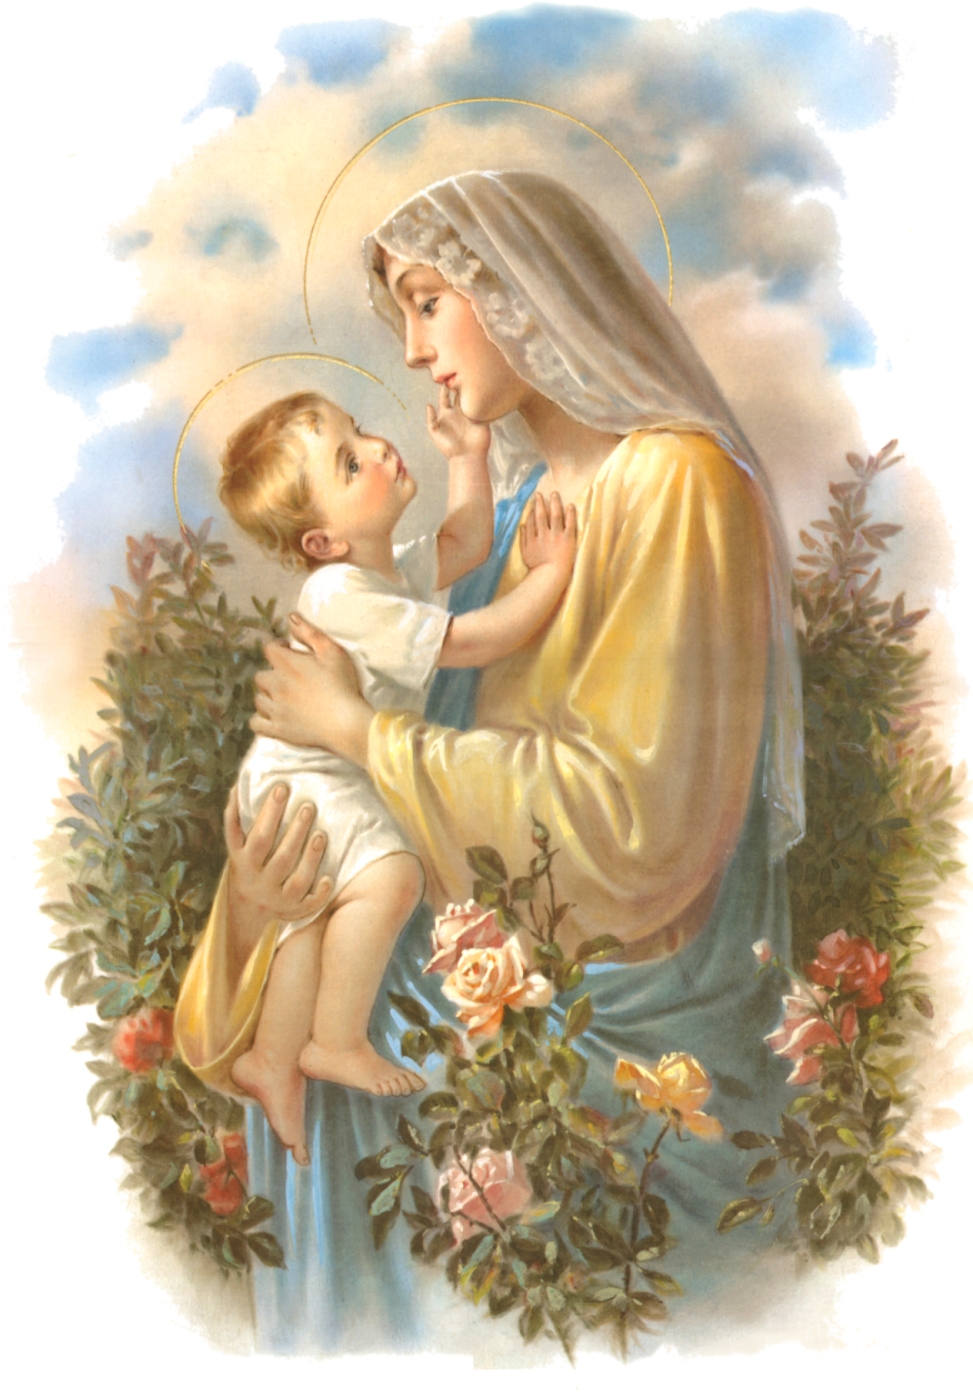 MADONNA AND CHILD POSTER